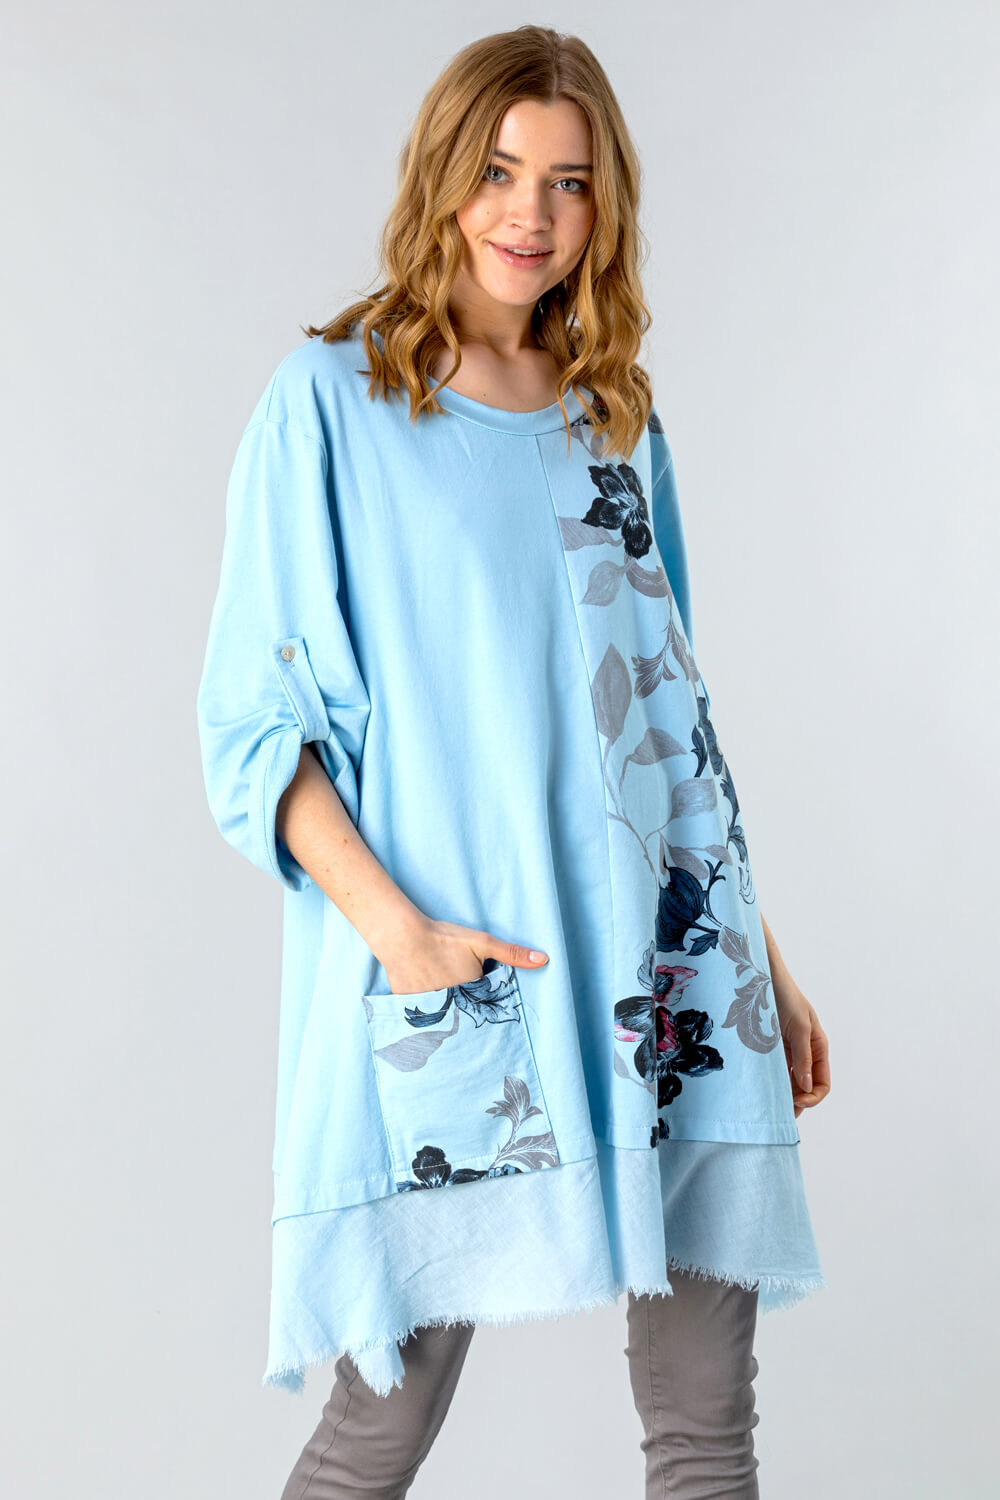 Floral Slouchy Pocket Tunic Top